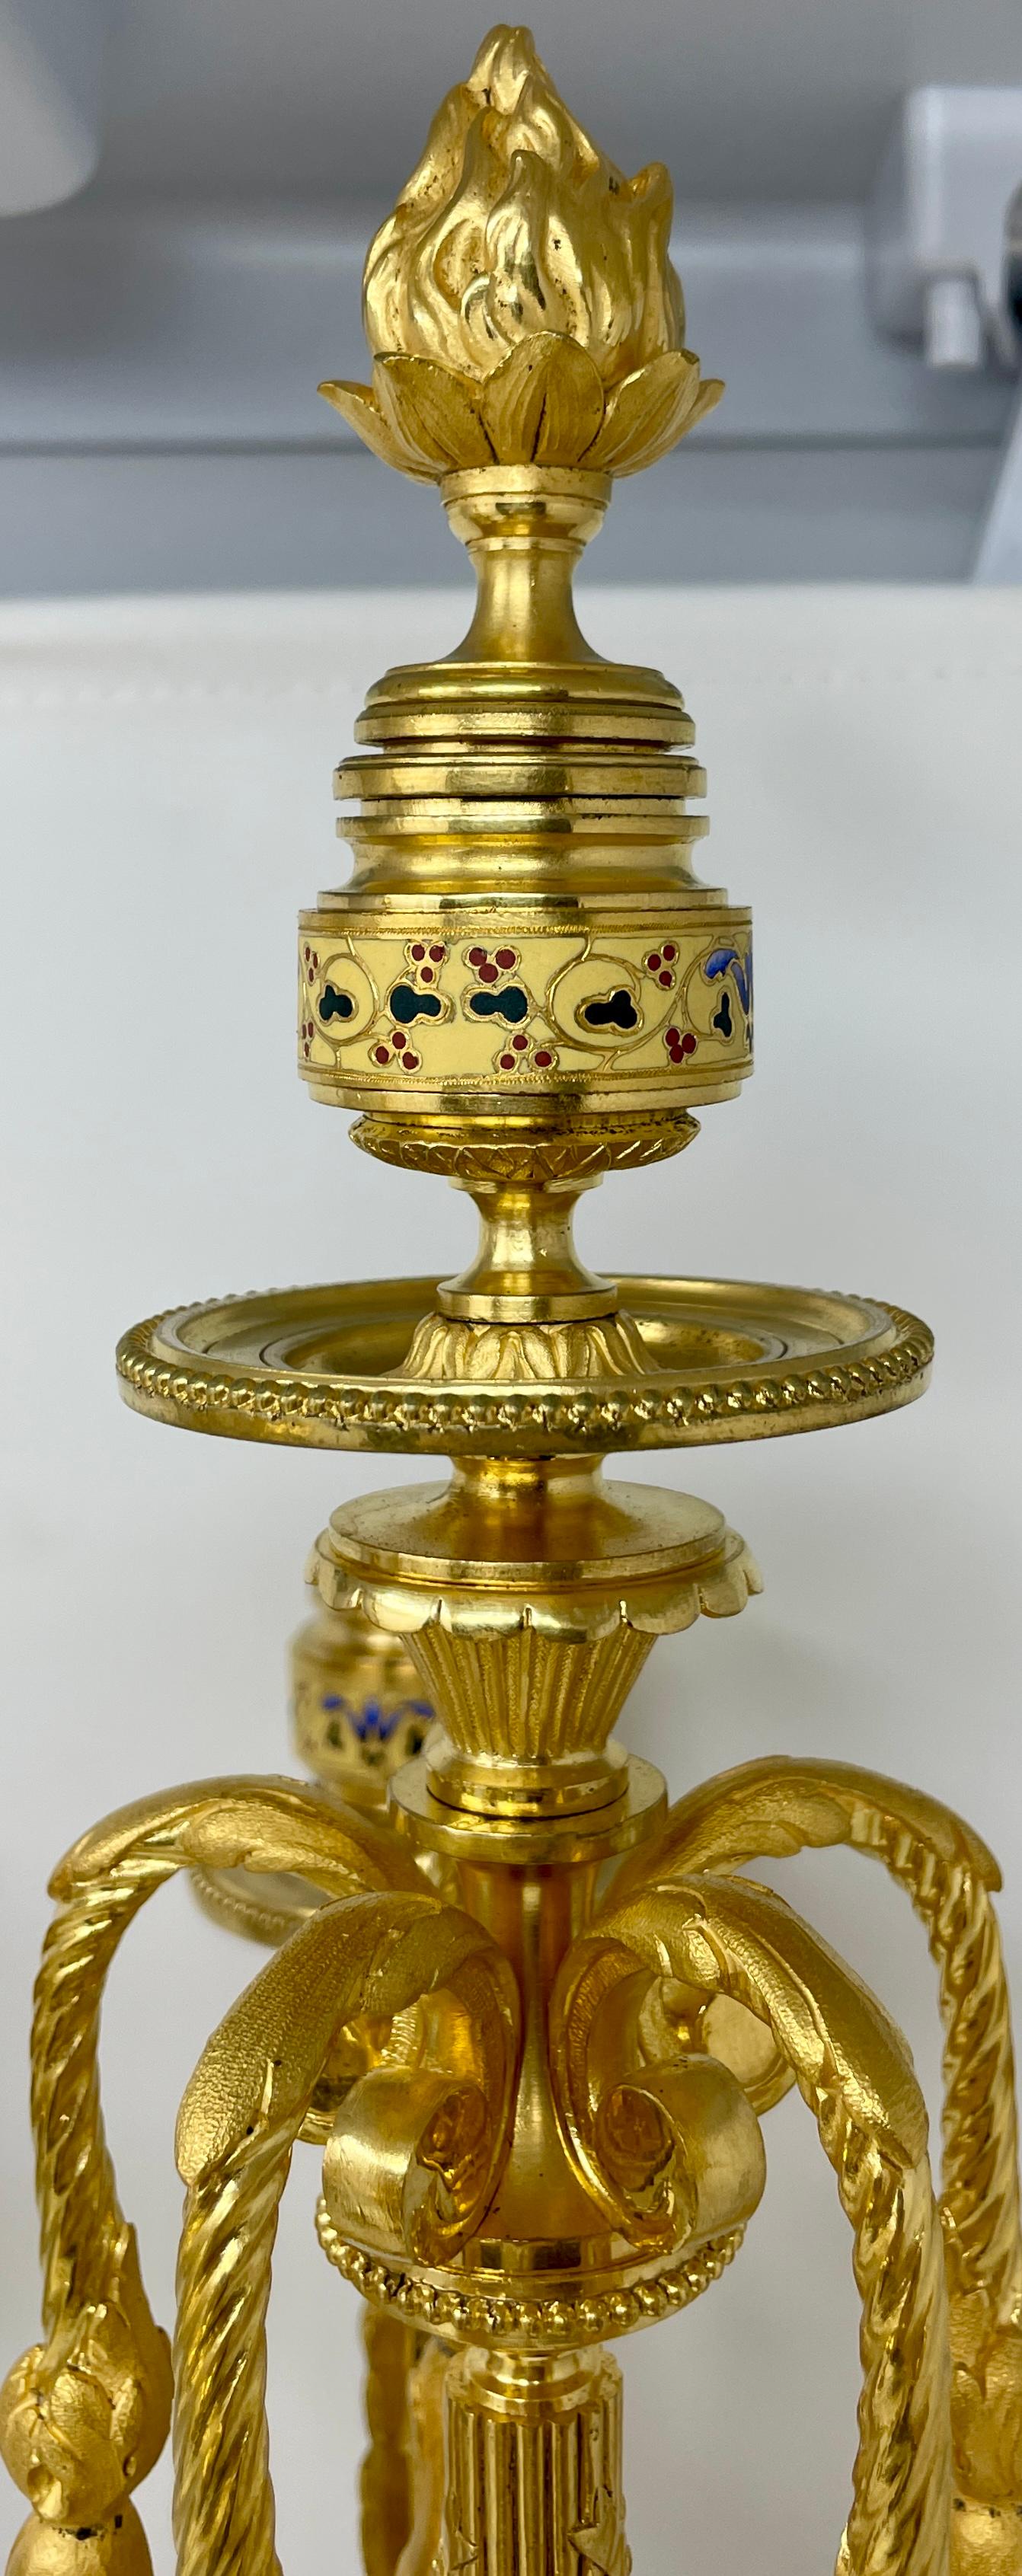 Pair Antique French Ormolu, Grey Marble & Cloisonné Enamel Candelabra Circa 1885 In Good Condition For Sale In New Orleans, LA